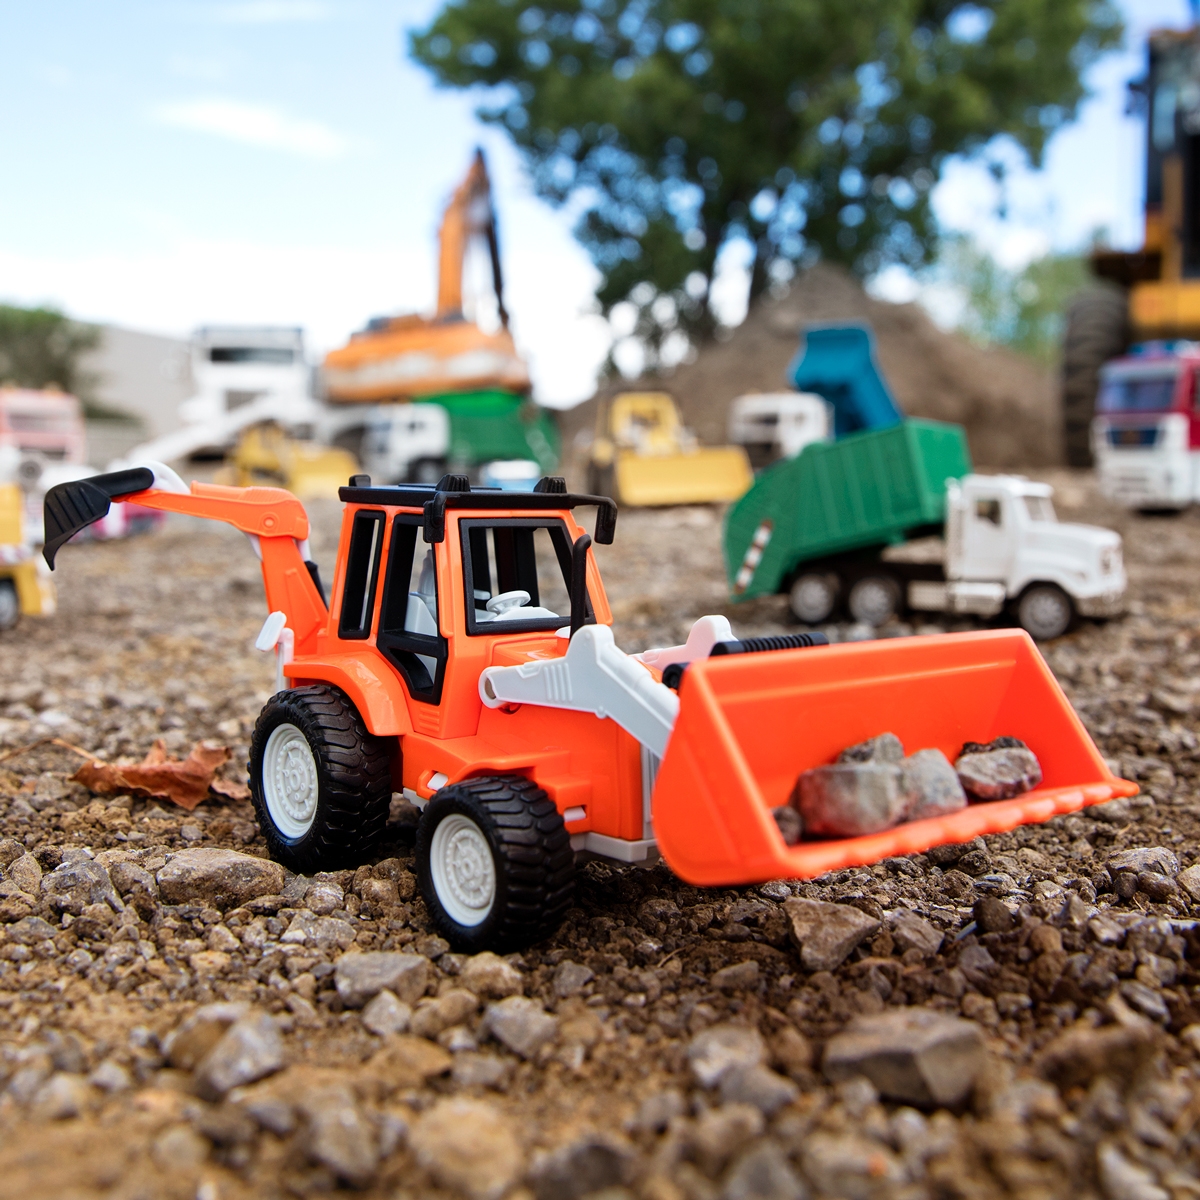 DRIVEN by Battat Backhoe Loader with Sound Effects and Movable Parts for Kids Aged 3+ Micro Backhoe Loader